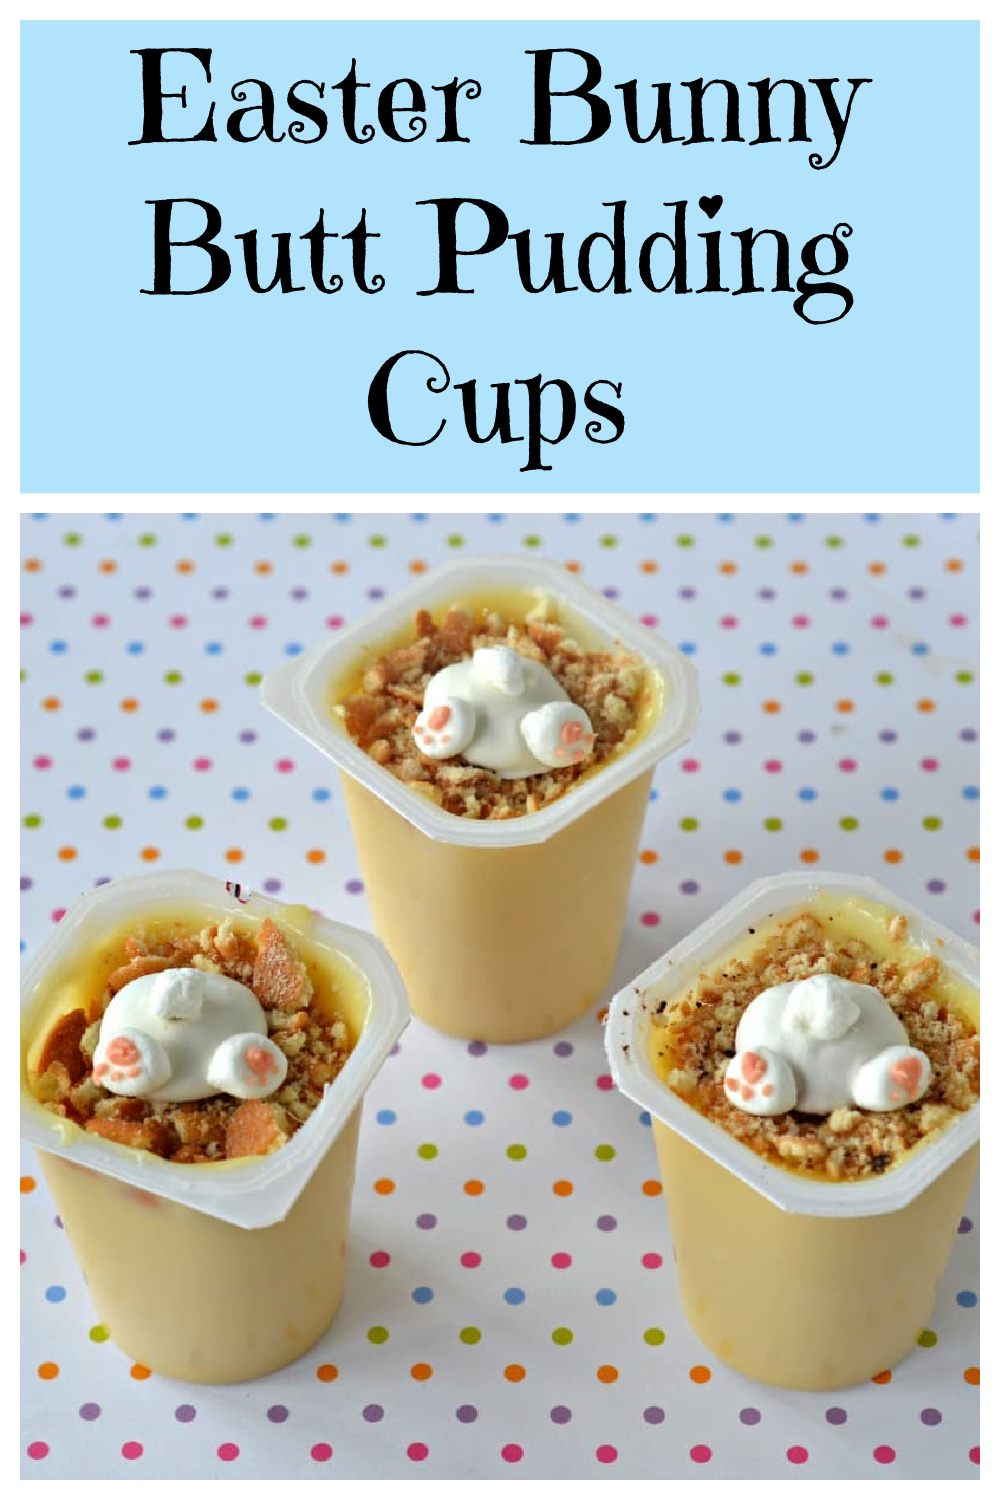 Easter Pudding Cups with Bunny Butts and Chocolate Carrots